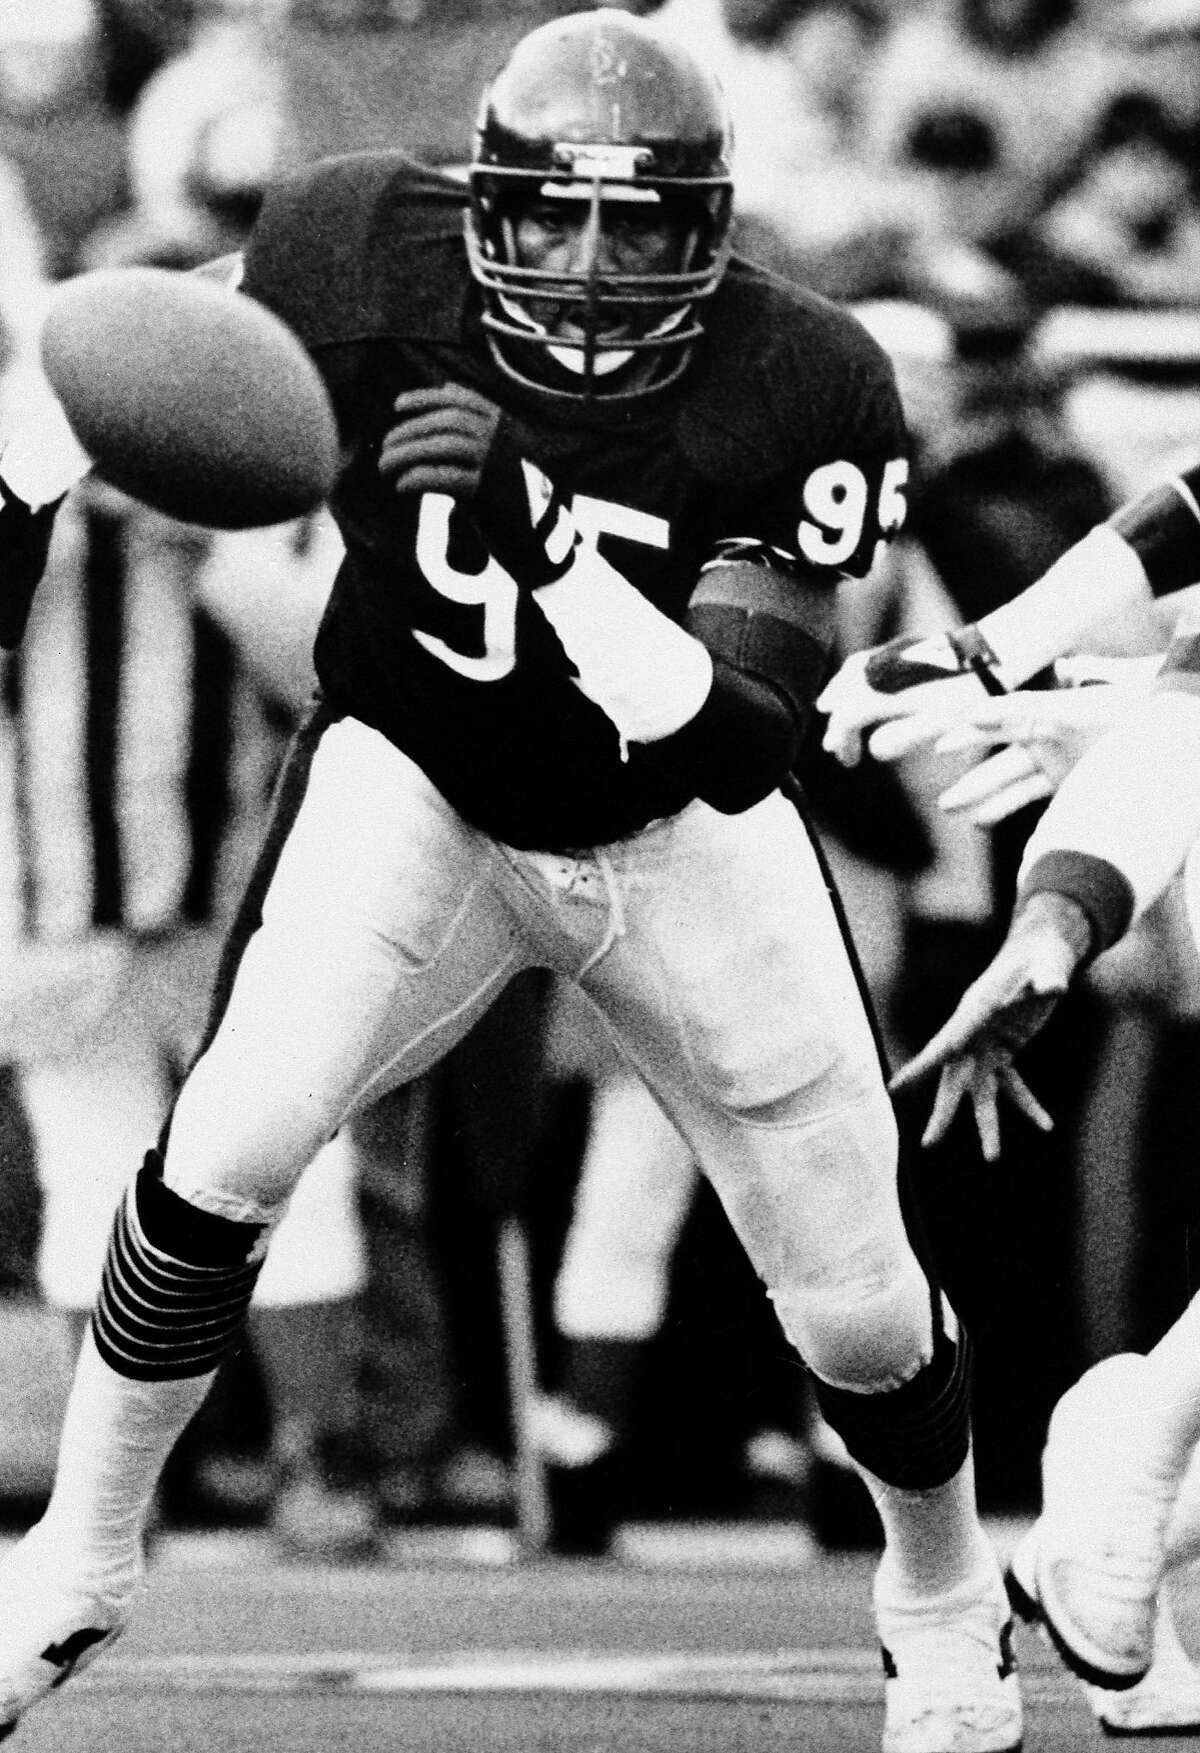 FILE - This Jan. 16, 1986 file photo shows Chicago Bears defensive end Richard Dent chases a loose ball during the NFL playoffs in Chicago. A group of retired NFL players says in a lawsuit filed Tuesday that the league, thirsty for profits, illegally supplied them with risky narcotics and other painkillers that numbed their injuries for games and led to medical complications down the road. The complaint names eight players, including three members of the Super Bowl champion 1985 Chicago Bears: Dent, offensive lineman Keith Van Horne, and quarterback Jim McMahon. Lawyers seek class-action status, and they say in the filing that more than 400 other former players have signed on to the lawsuit. (AP Photo, File)